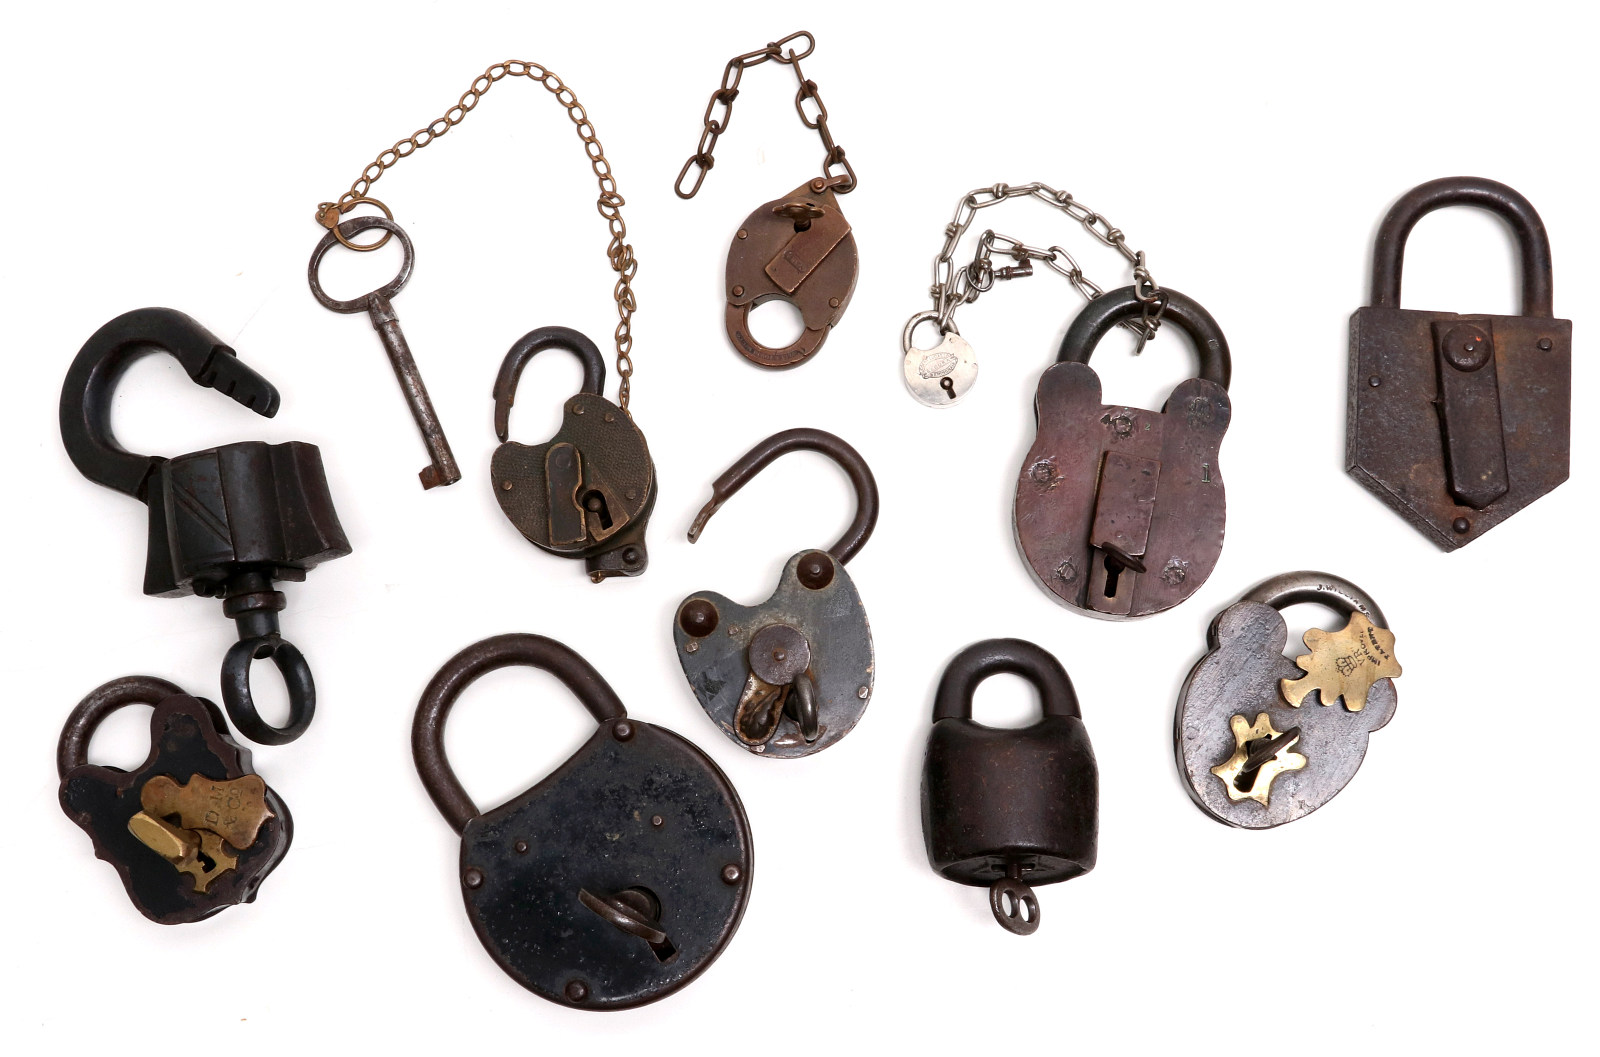 A COLLECTION OF OLD AND UNUSUAL 19TH C. PADLOCKS